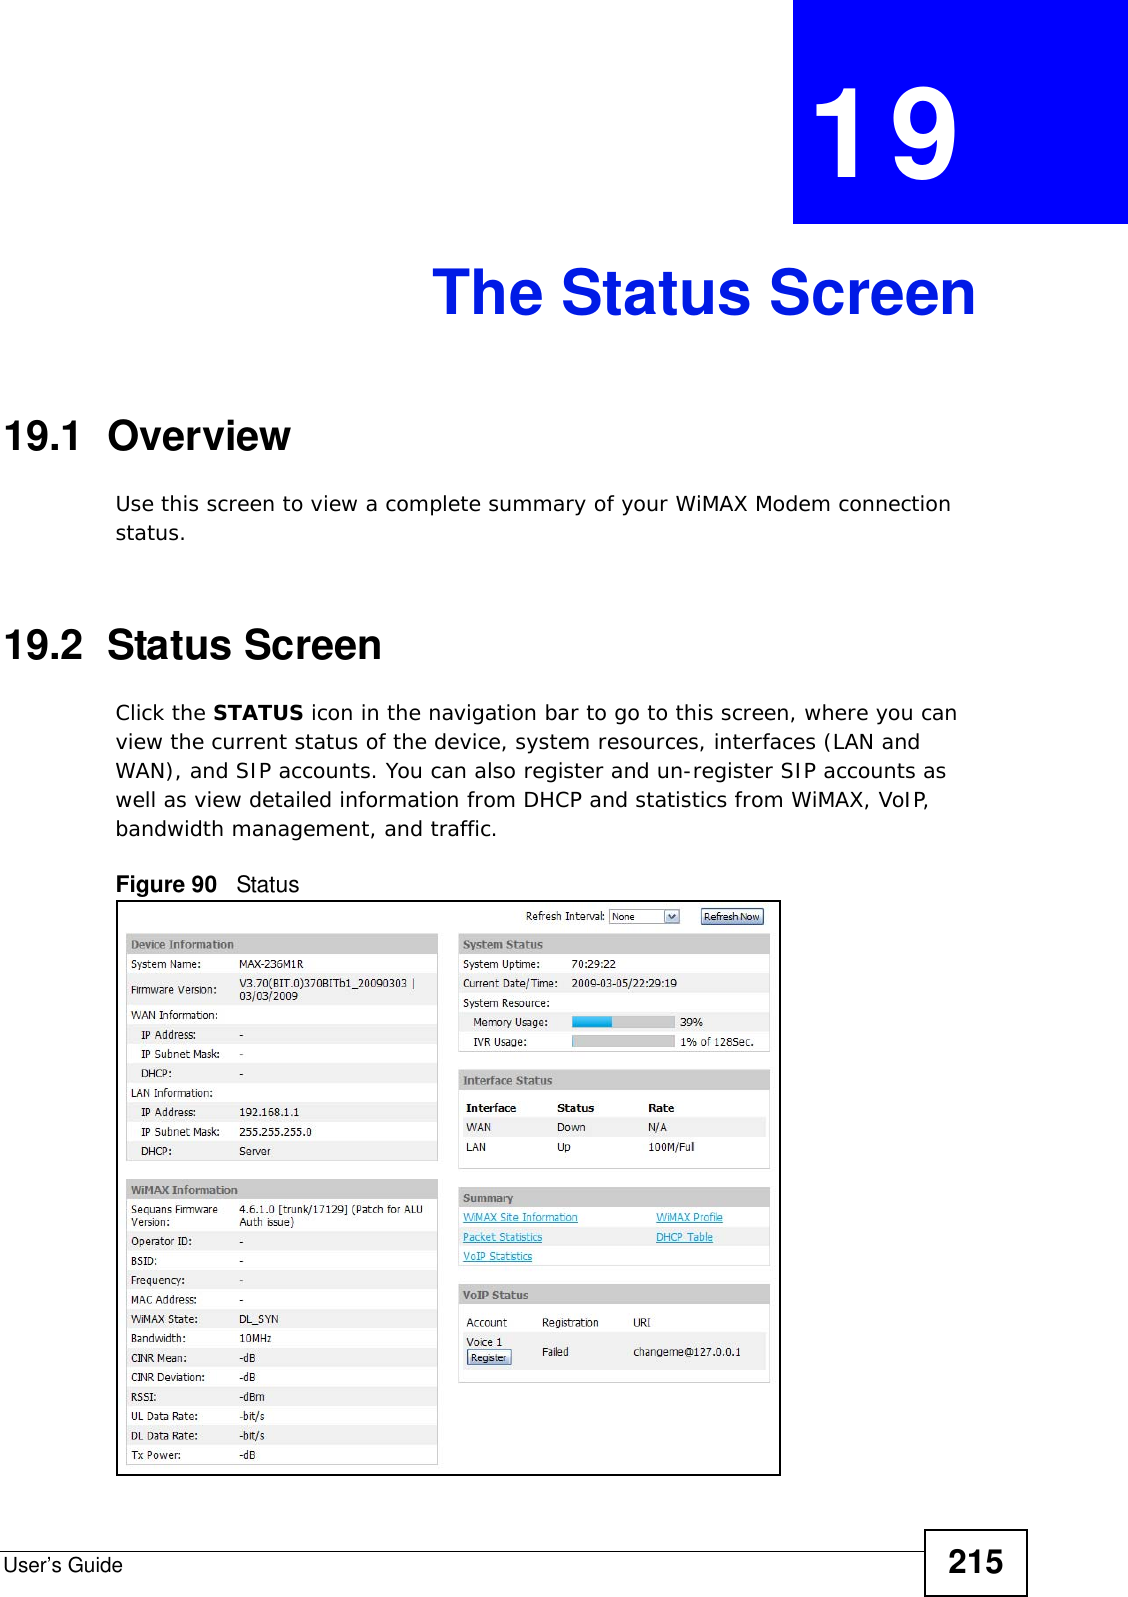 User’s Guide 215CHAPTER  19 The Status Screen19.1  OverviewUse this screen to view a complete summary of your WiMAX Modem connection status.19.2  Status ScreenClick the STATUS icon in the navigation bar to go to this screen, where you can view the current status of the device, system resources, interfaces (LAN and WAN), and SIP accounts. You can also register and un-register SIP accounts as well as view detailed information from DHCP and statistics from WiMAX, VoIP, bandwidth management, and traffic.Figure 90   Status